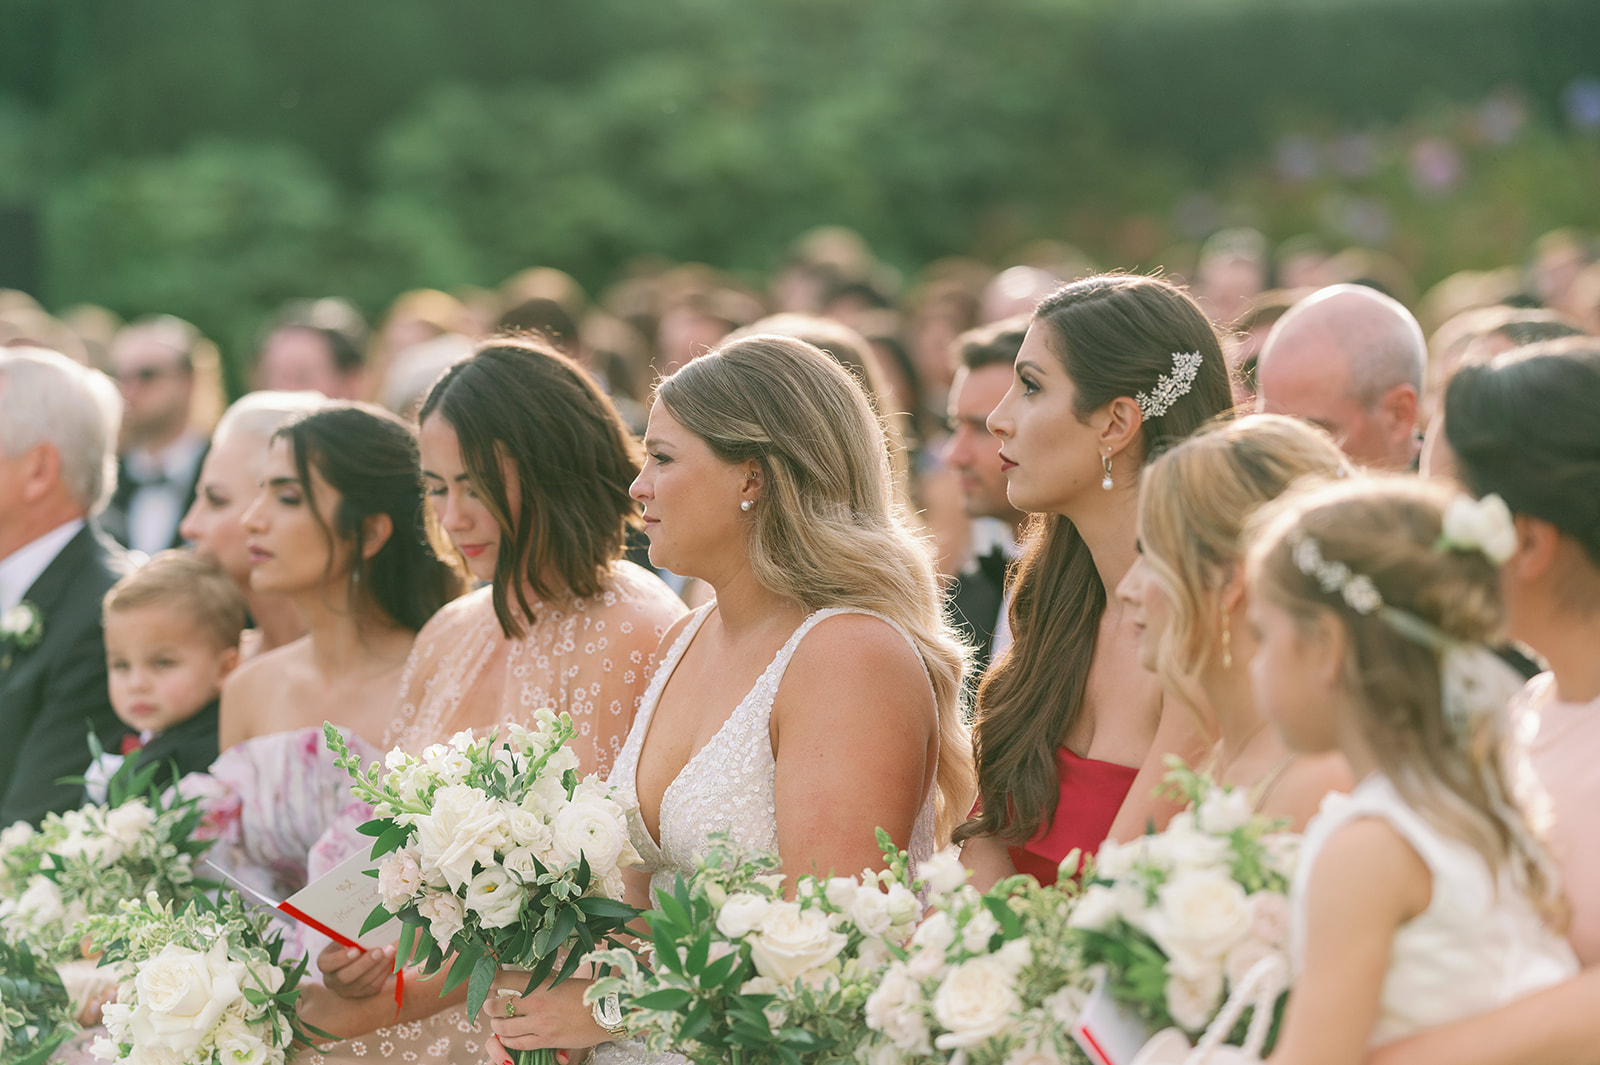 Candid shot of six bridesmaids sitting in the front row watching the wedding ceremony. 